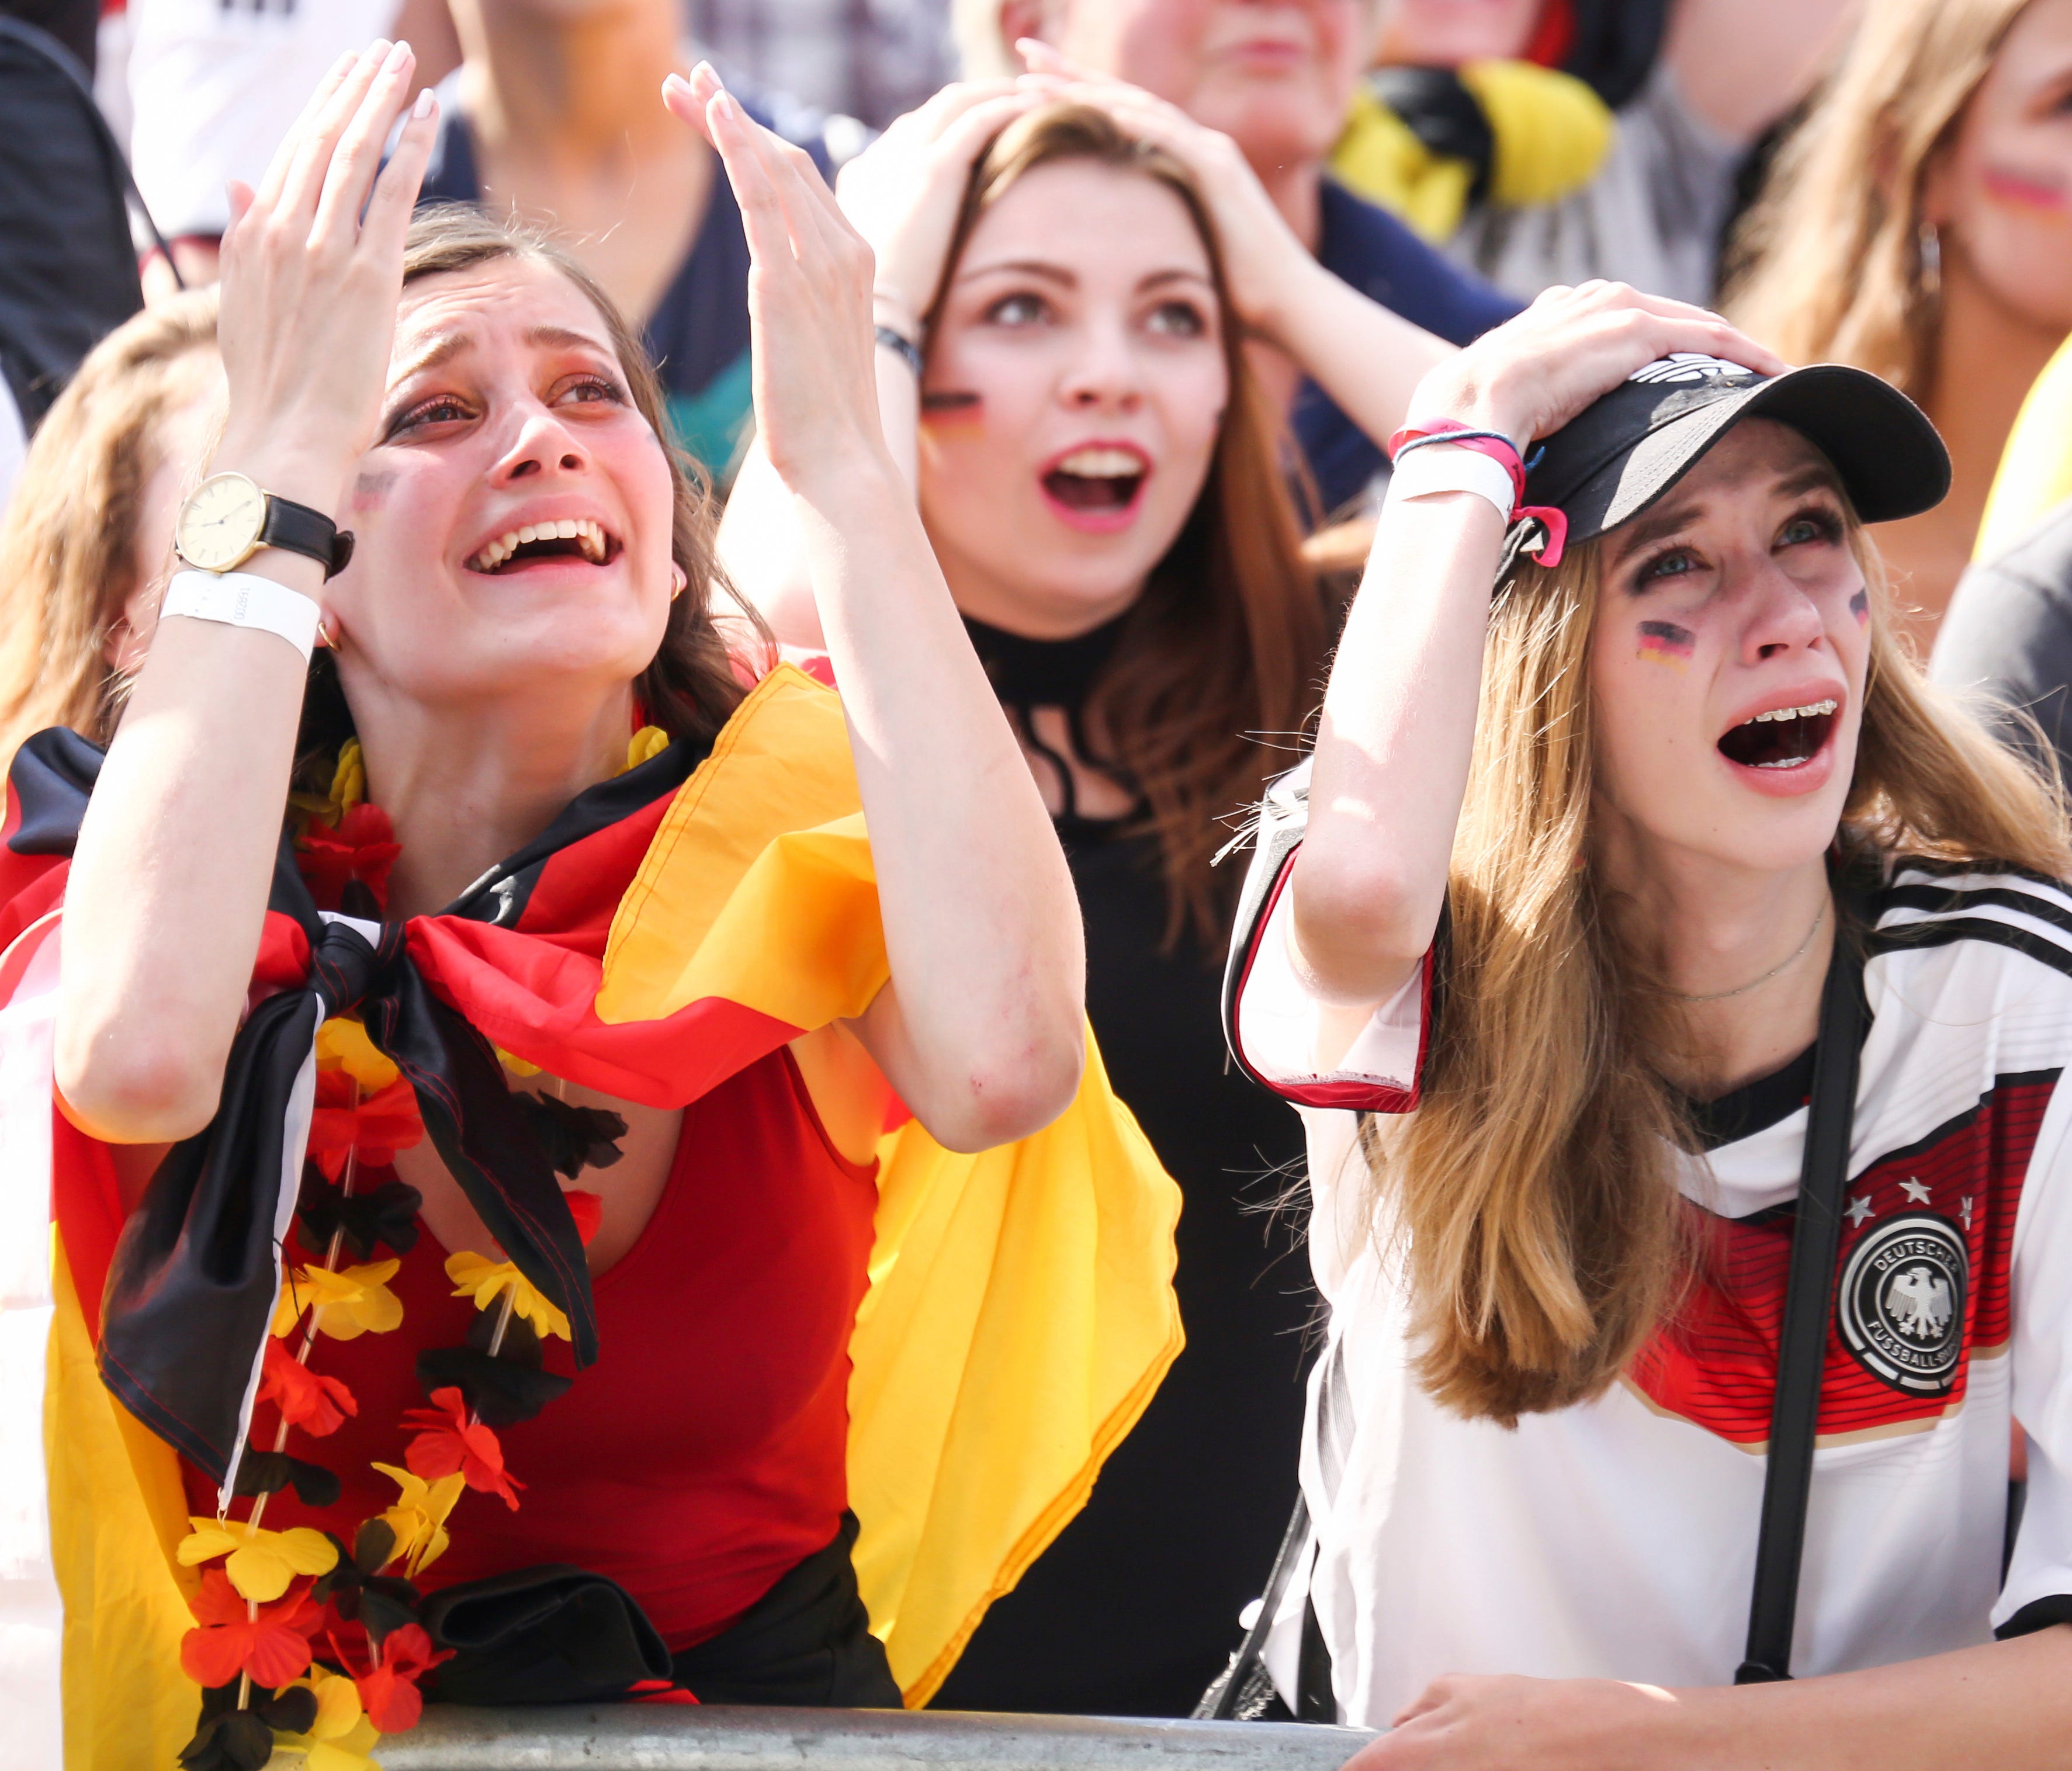 Fans react after Germany was eliminated from the World Cup as they watch in Hamburg.